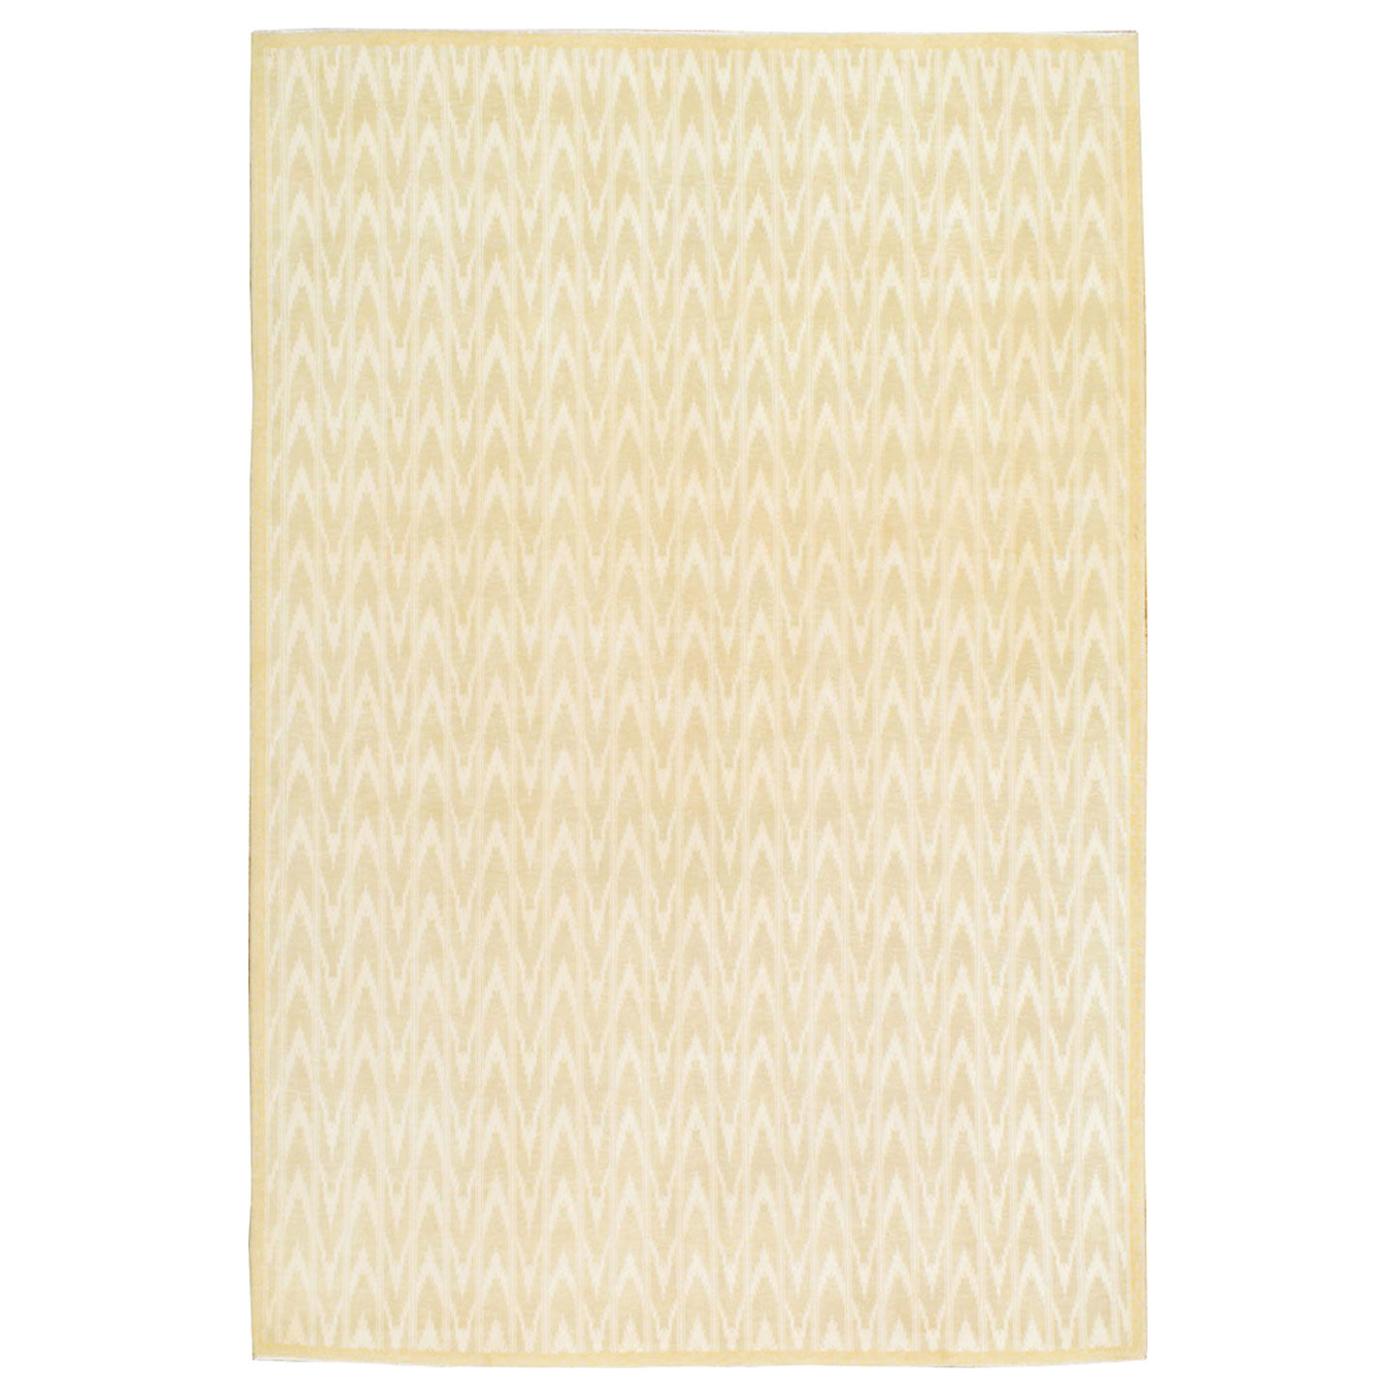 Midcentury Modern Handmade Accent Rug in Warm Beige and Ivory For Sale